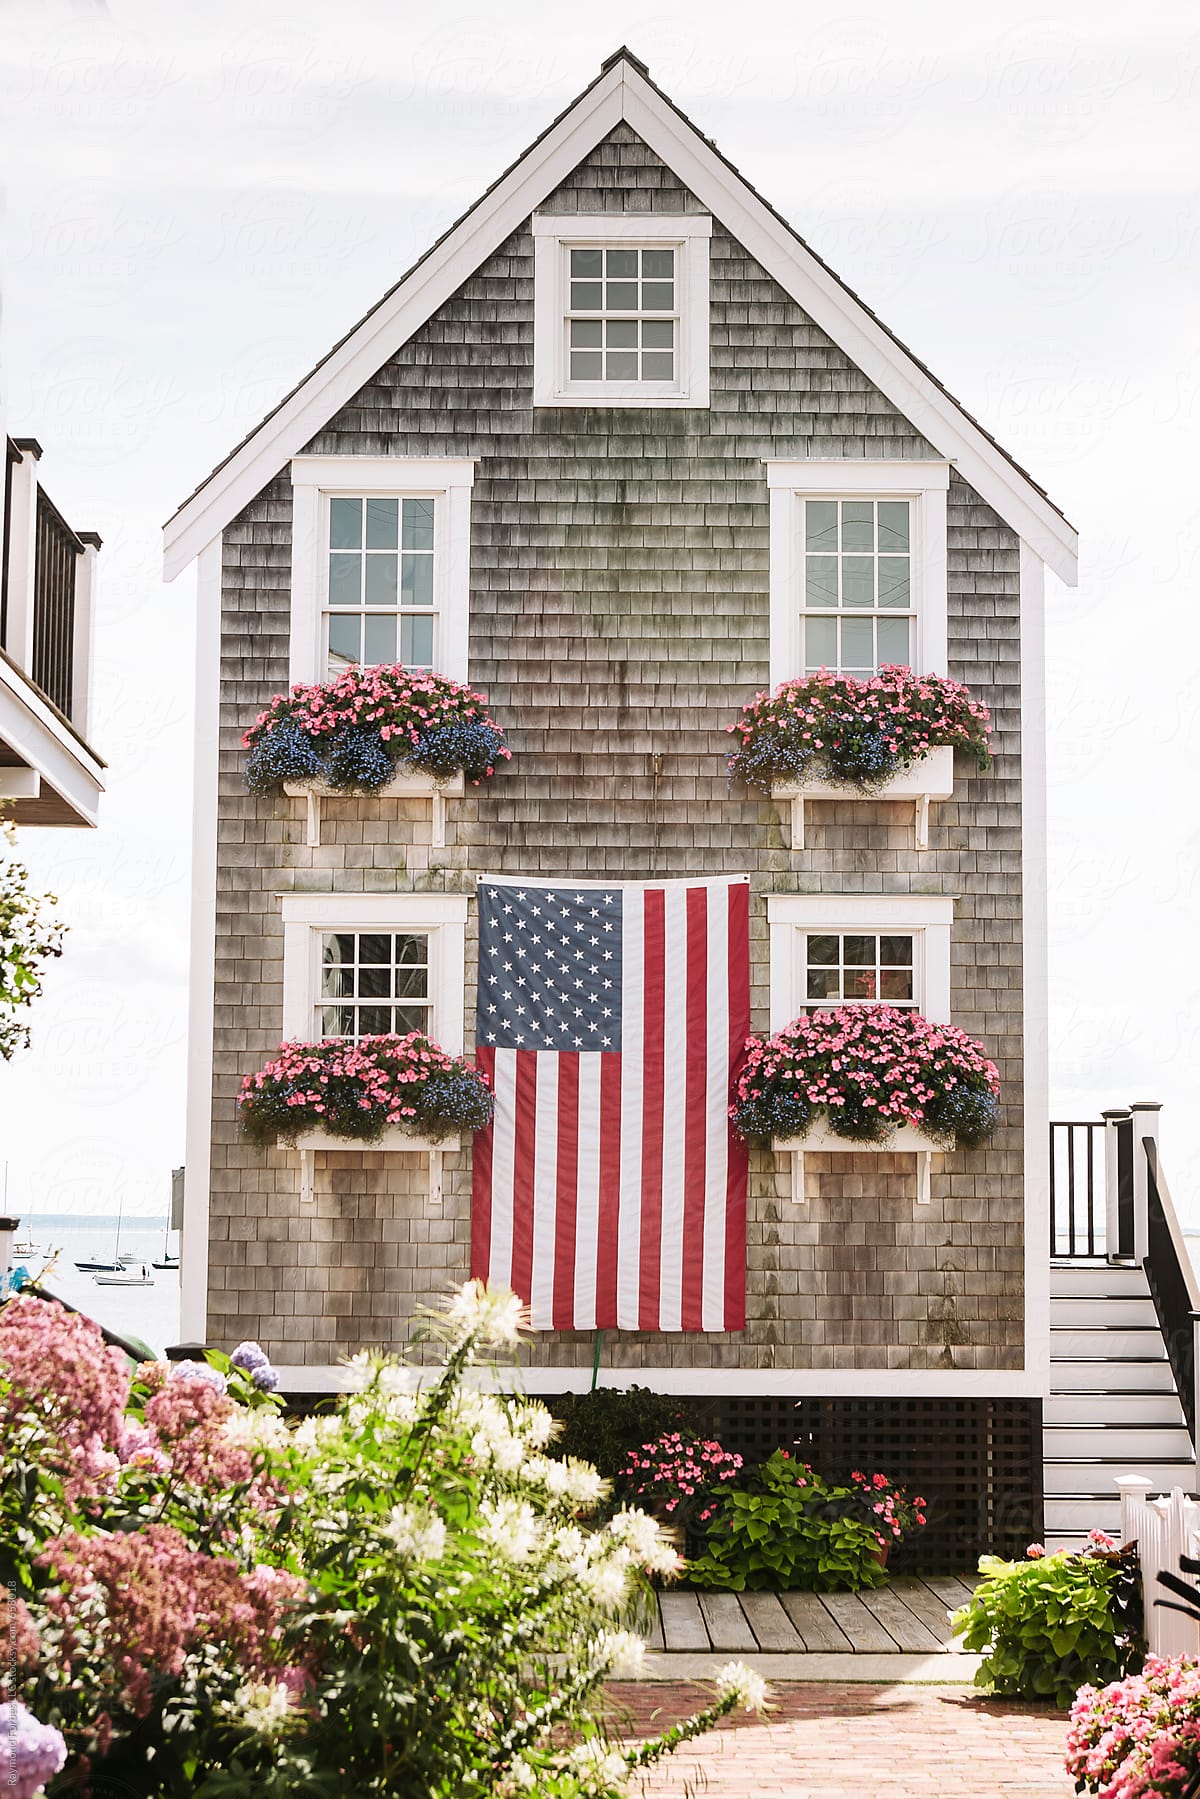 American Flag on house in Provincetown, Cape Cod, Massachusetts